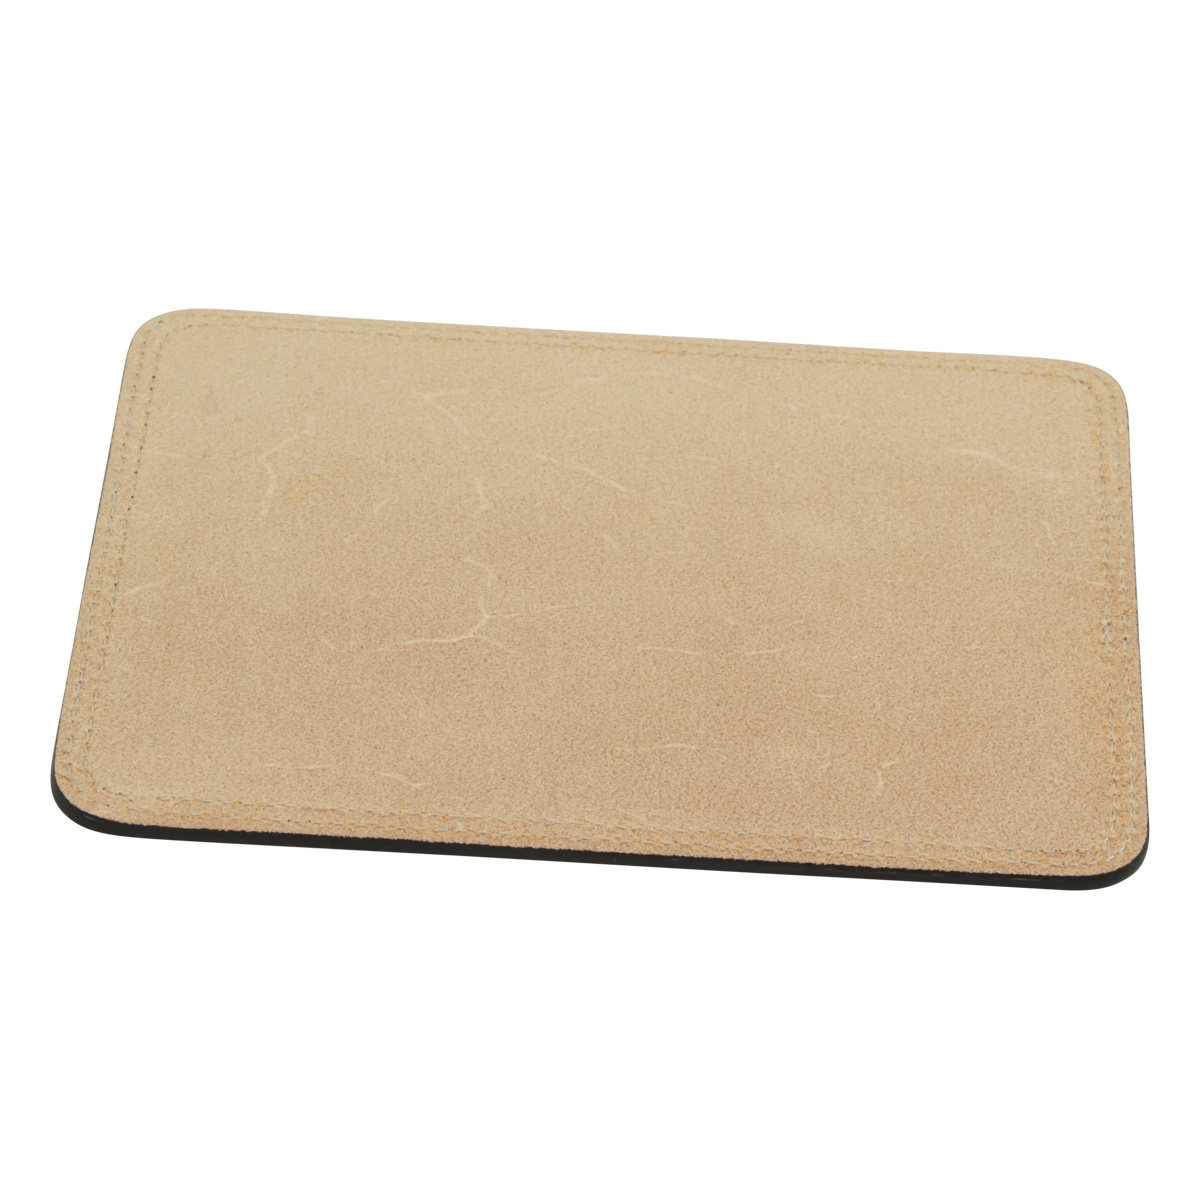 Leather mouse pad - green|761089VE|Old Angler Firenze